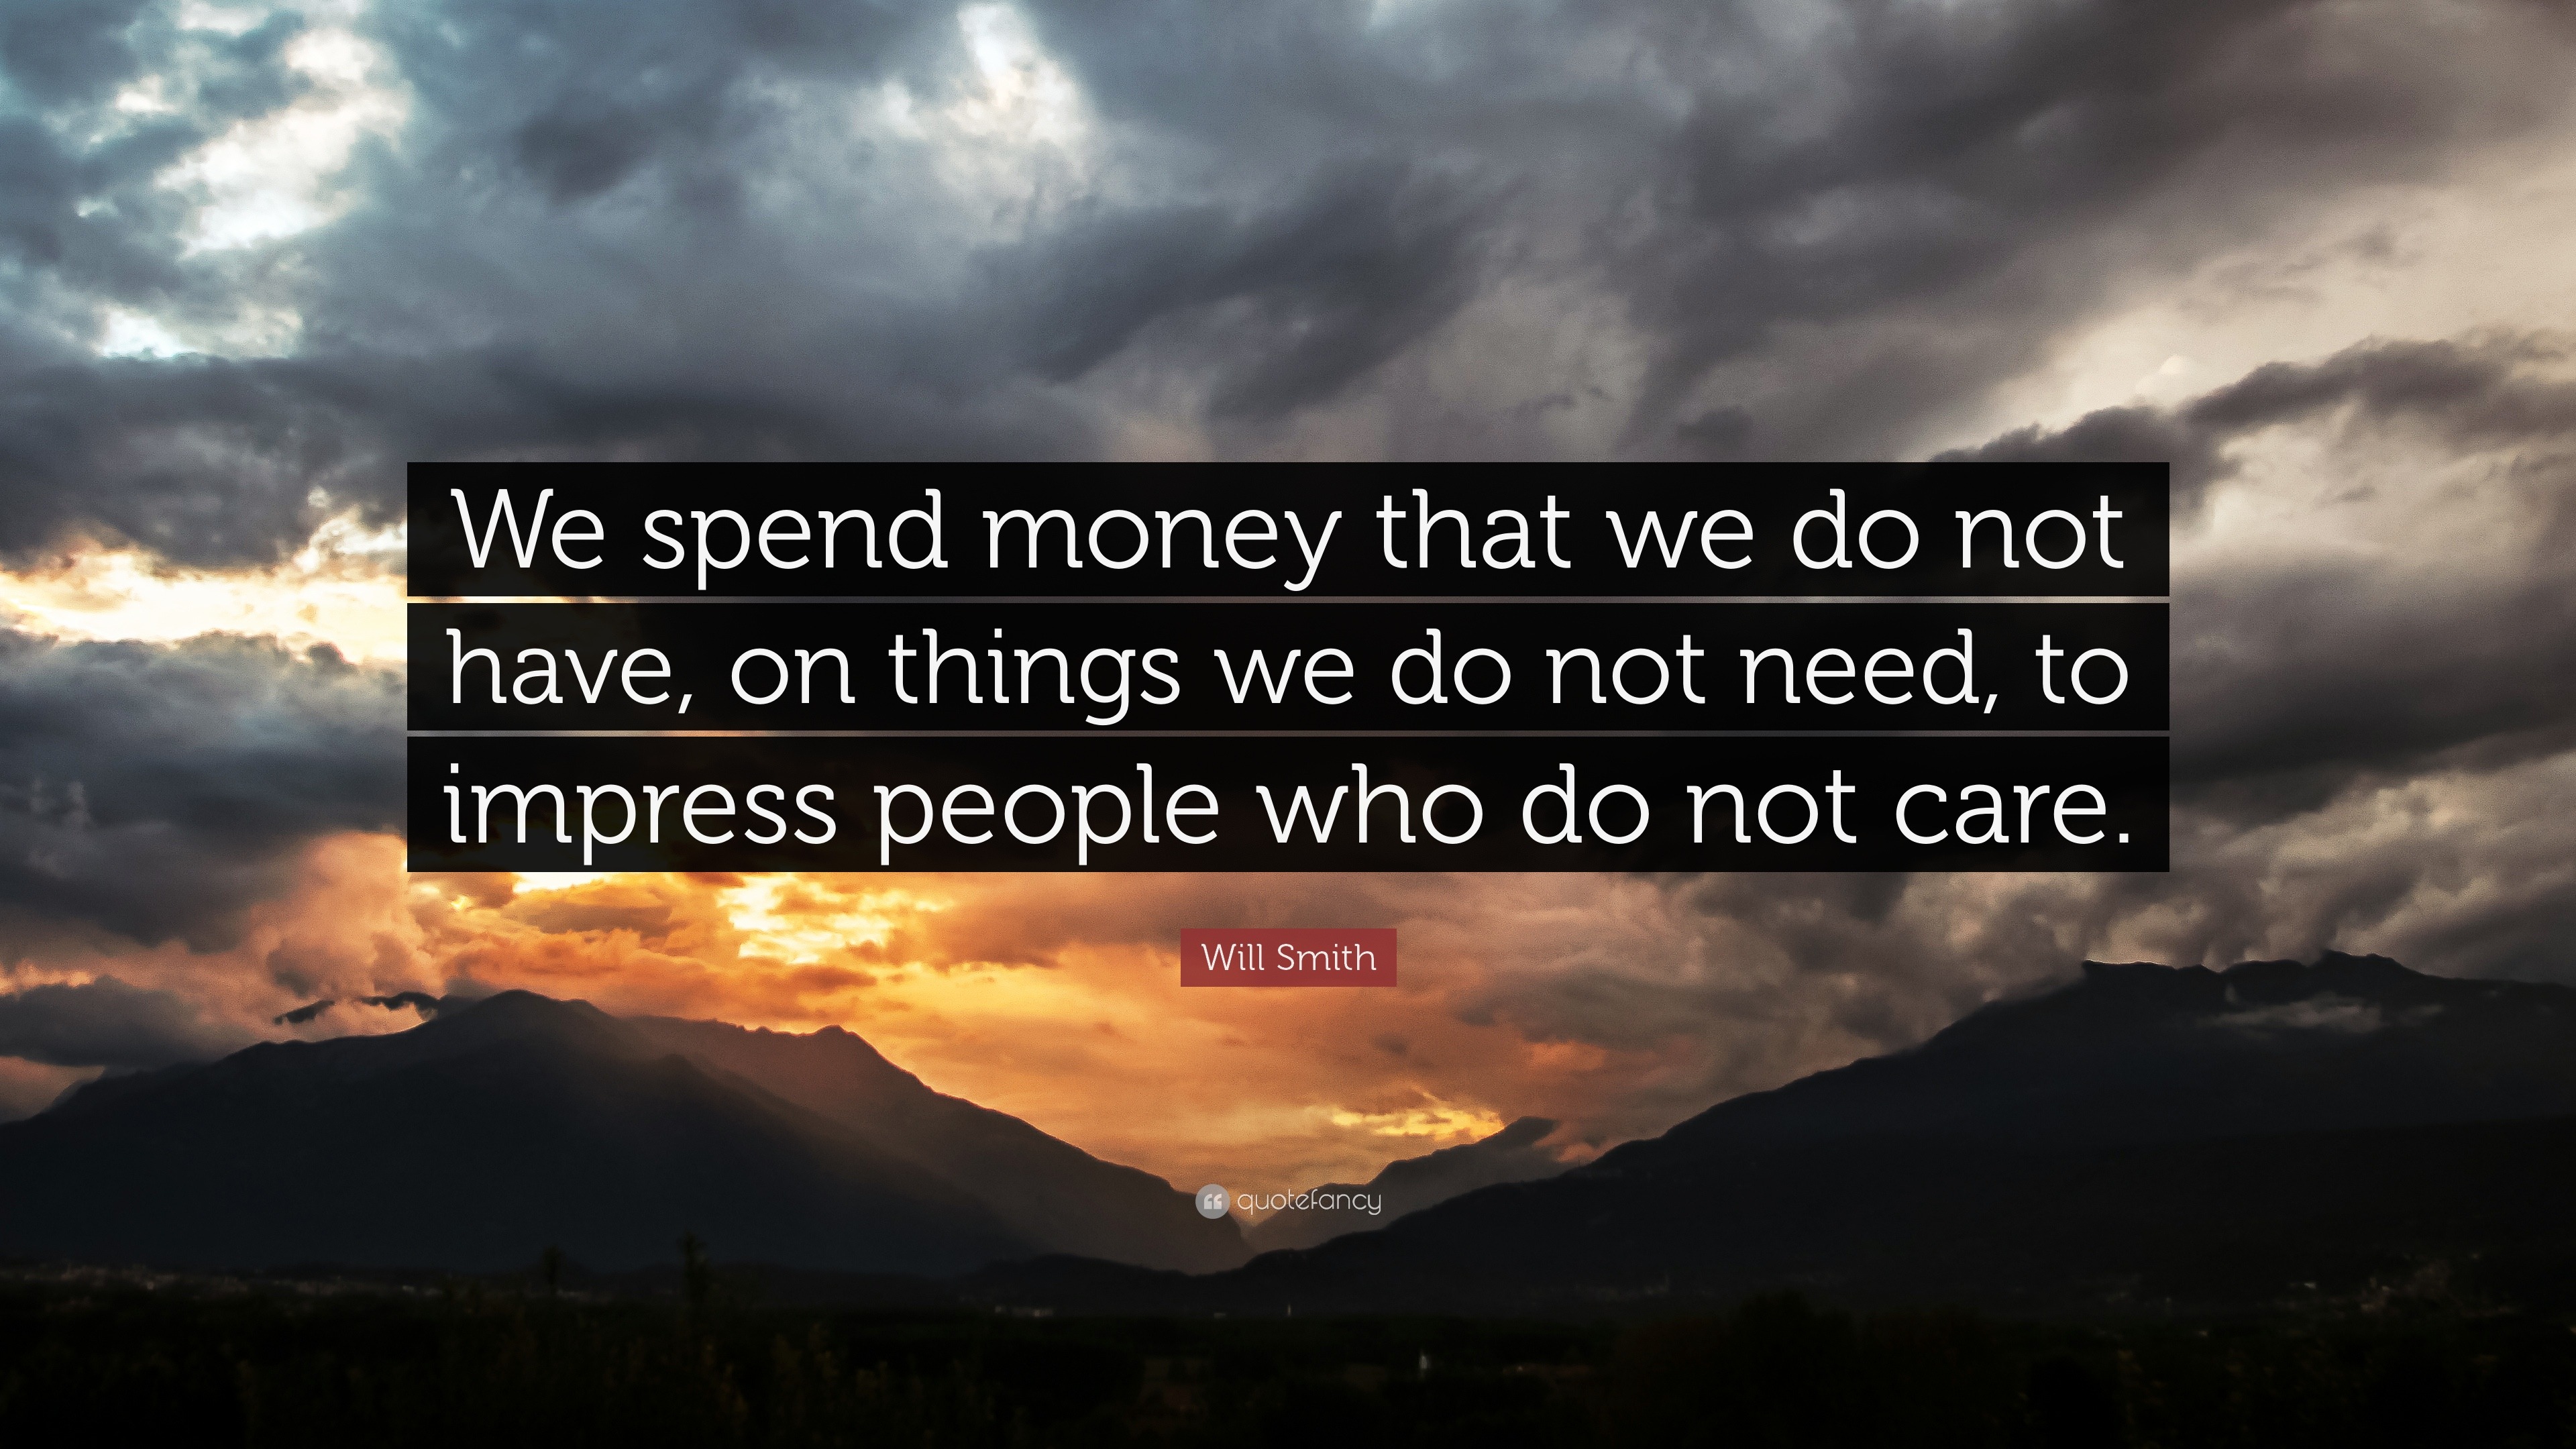 Will Smith Quote “We spend money that we do not have, on